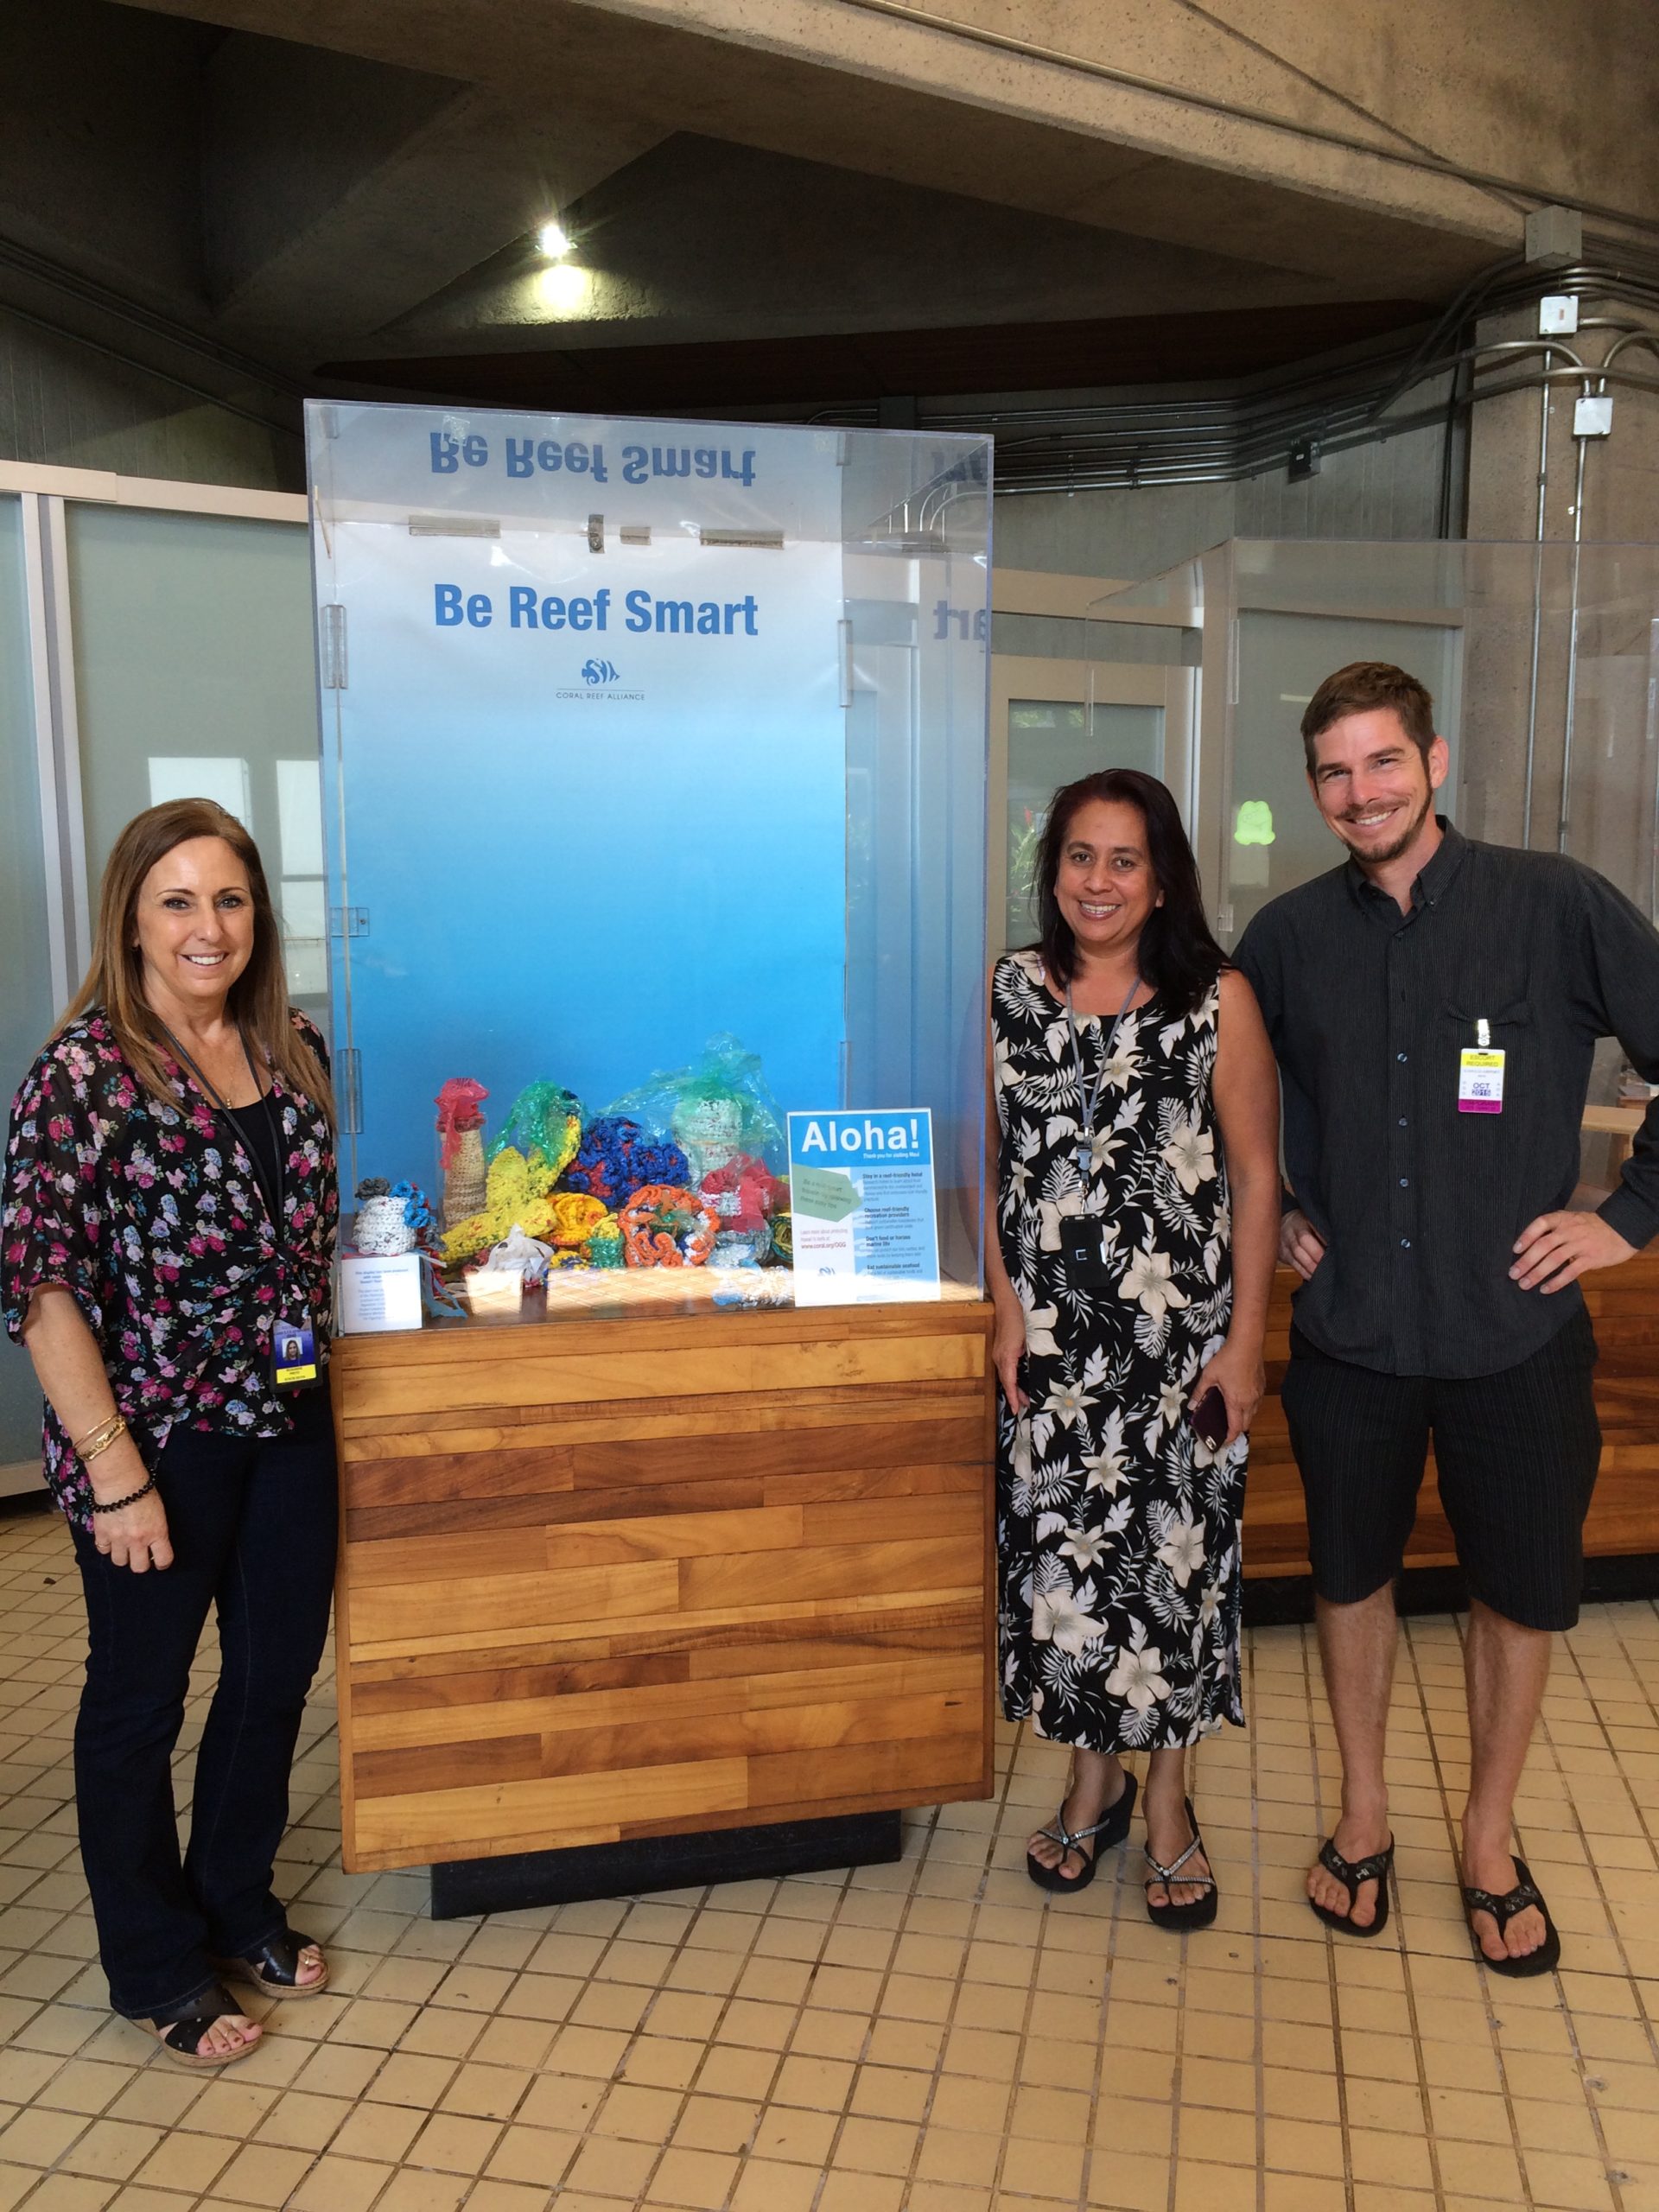 Hawai'i Field Manager Wes Crile with Maui Airport Representatives in front of CORAL's displays